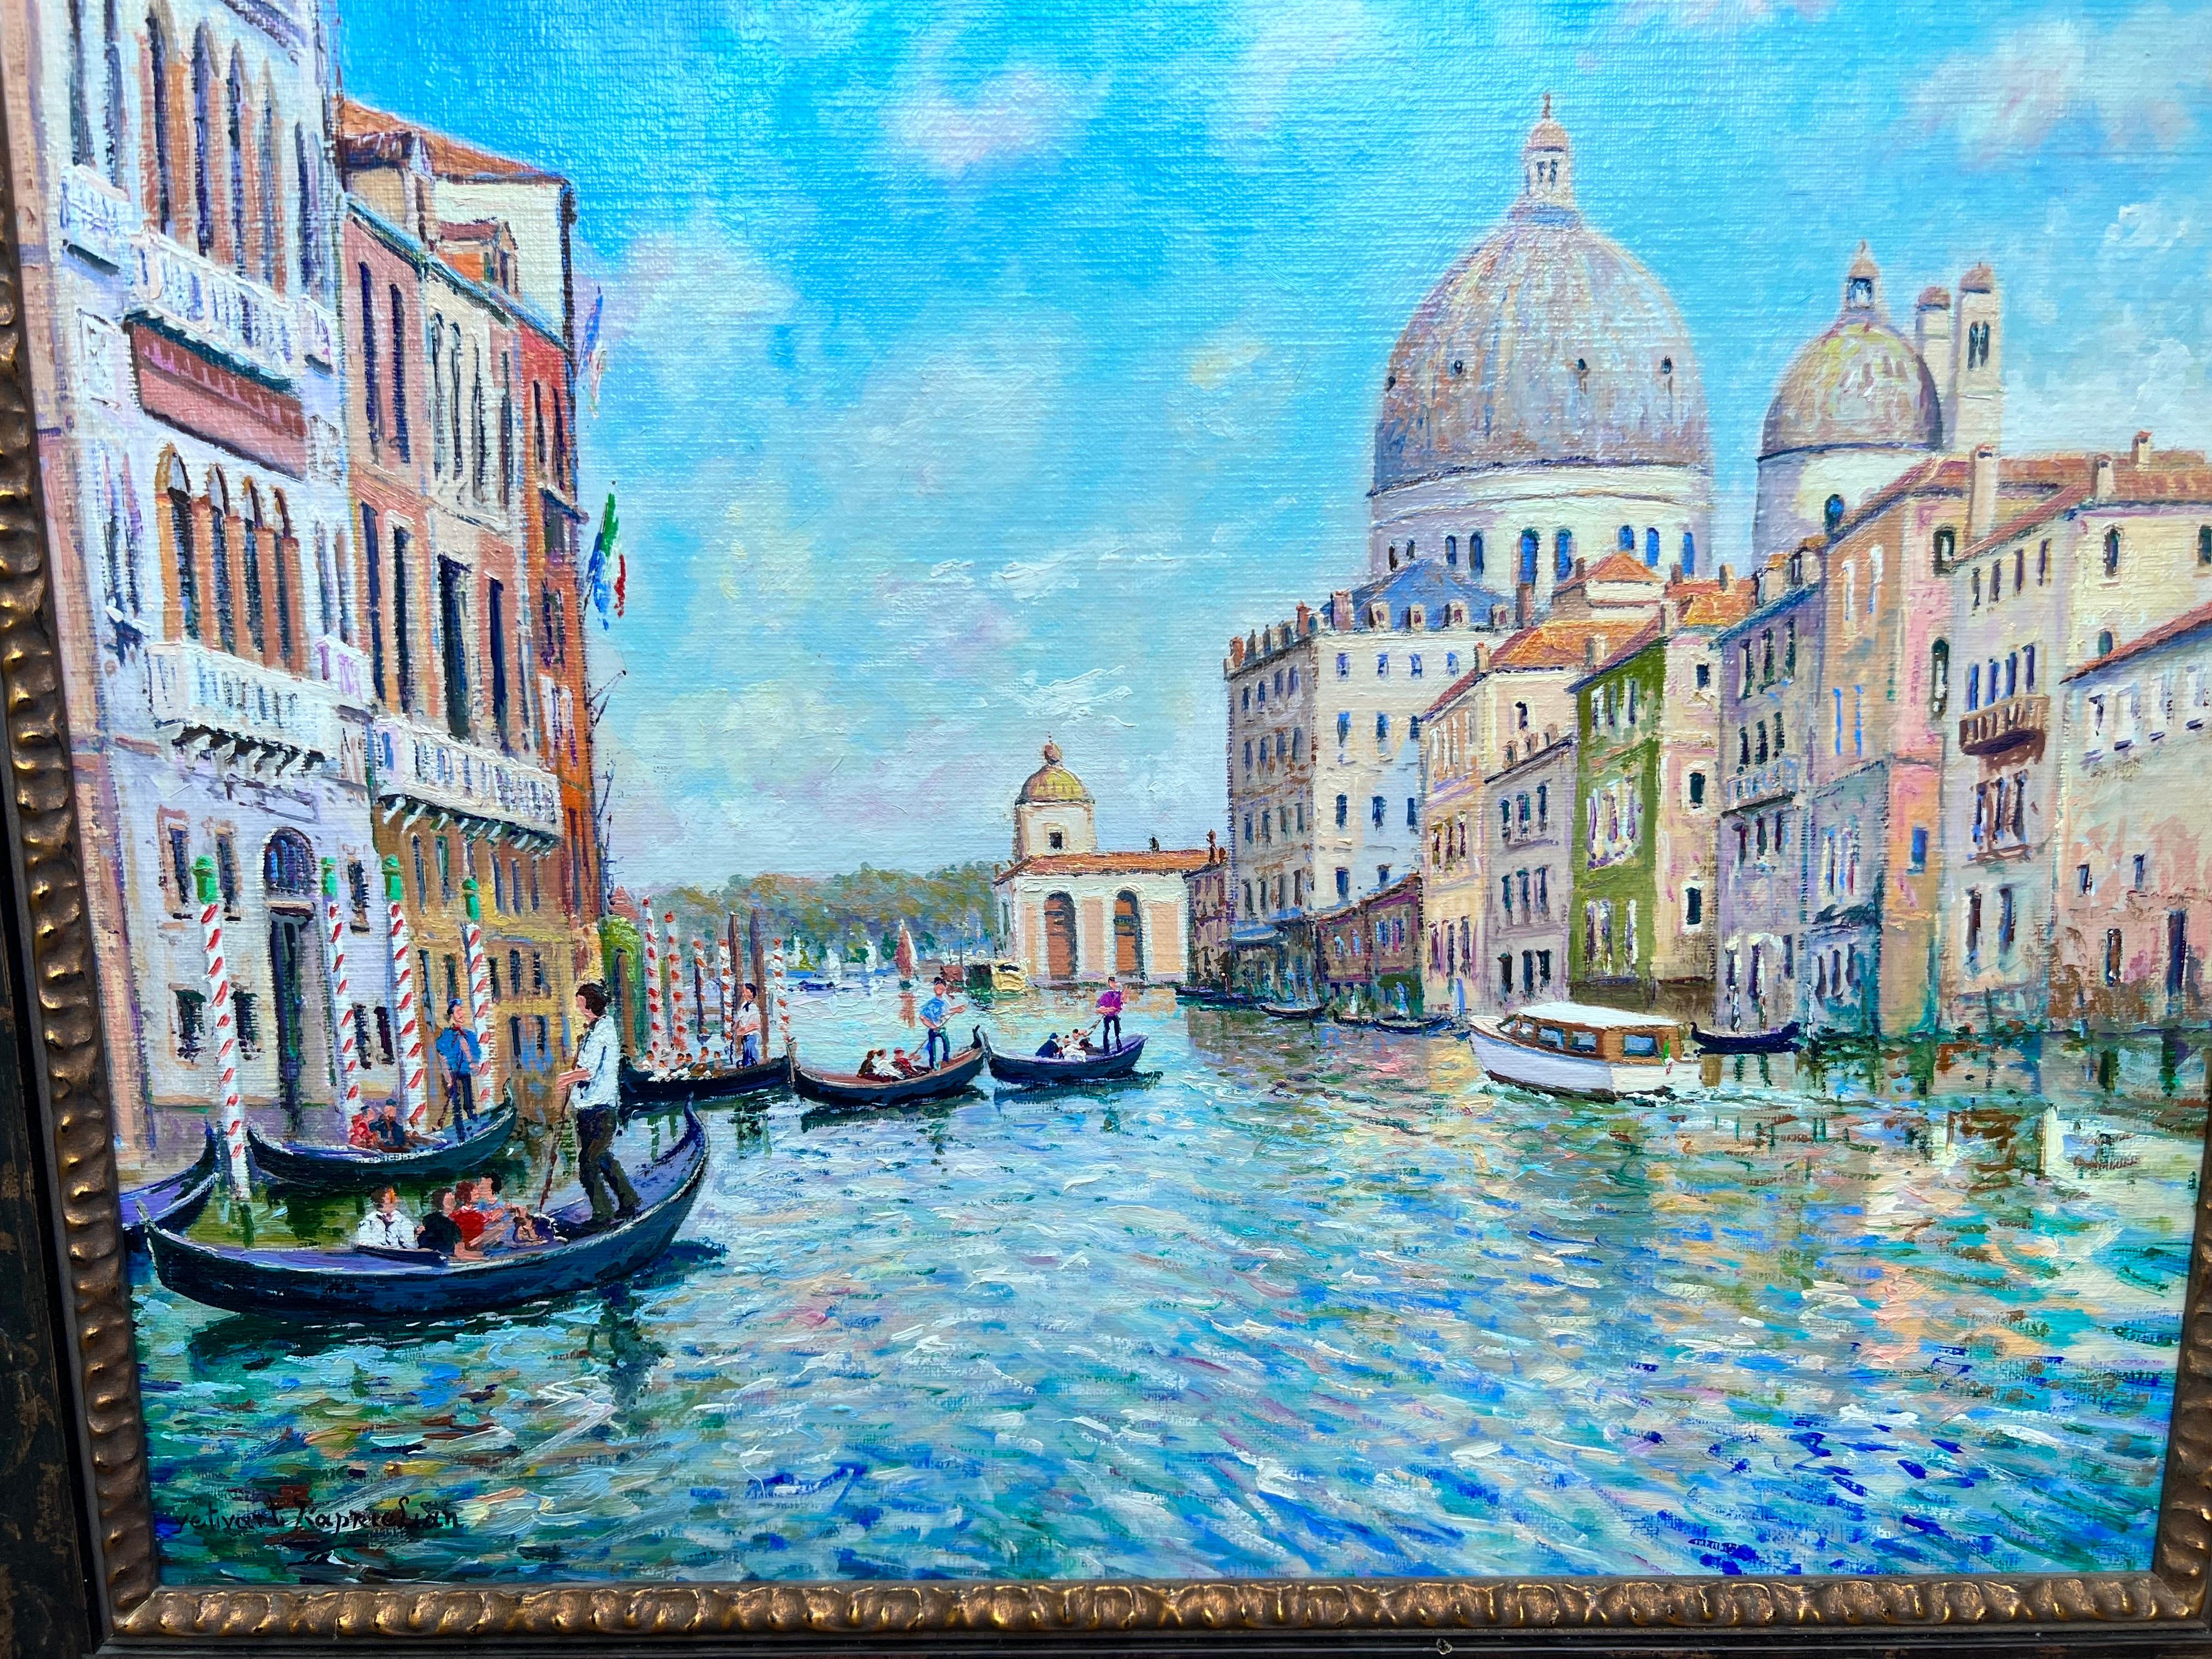 The Grand Canal in Venise. - Painting by Yetvart Kaprielian